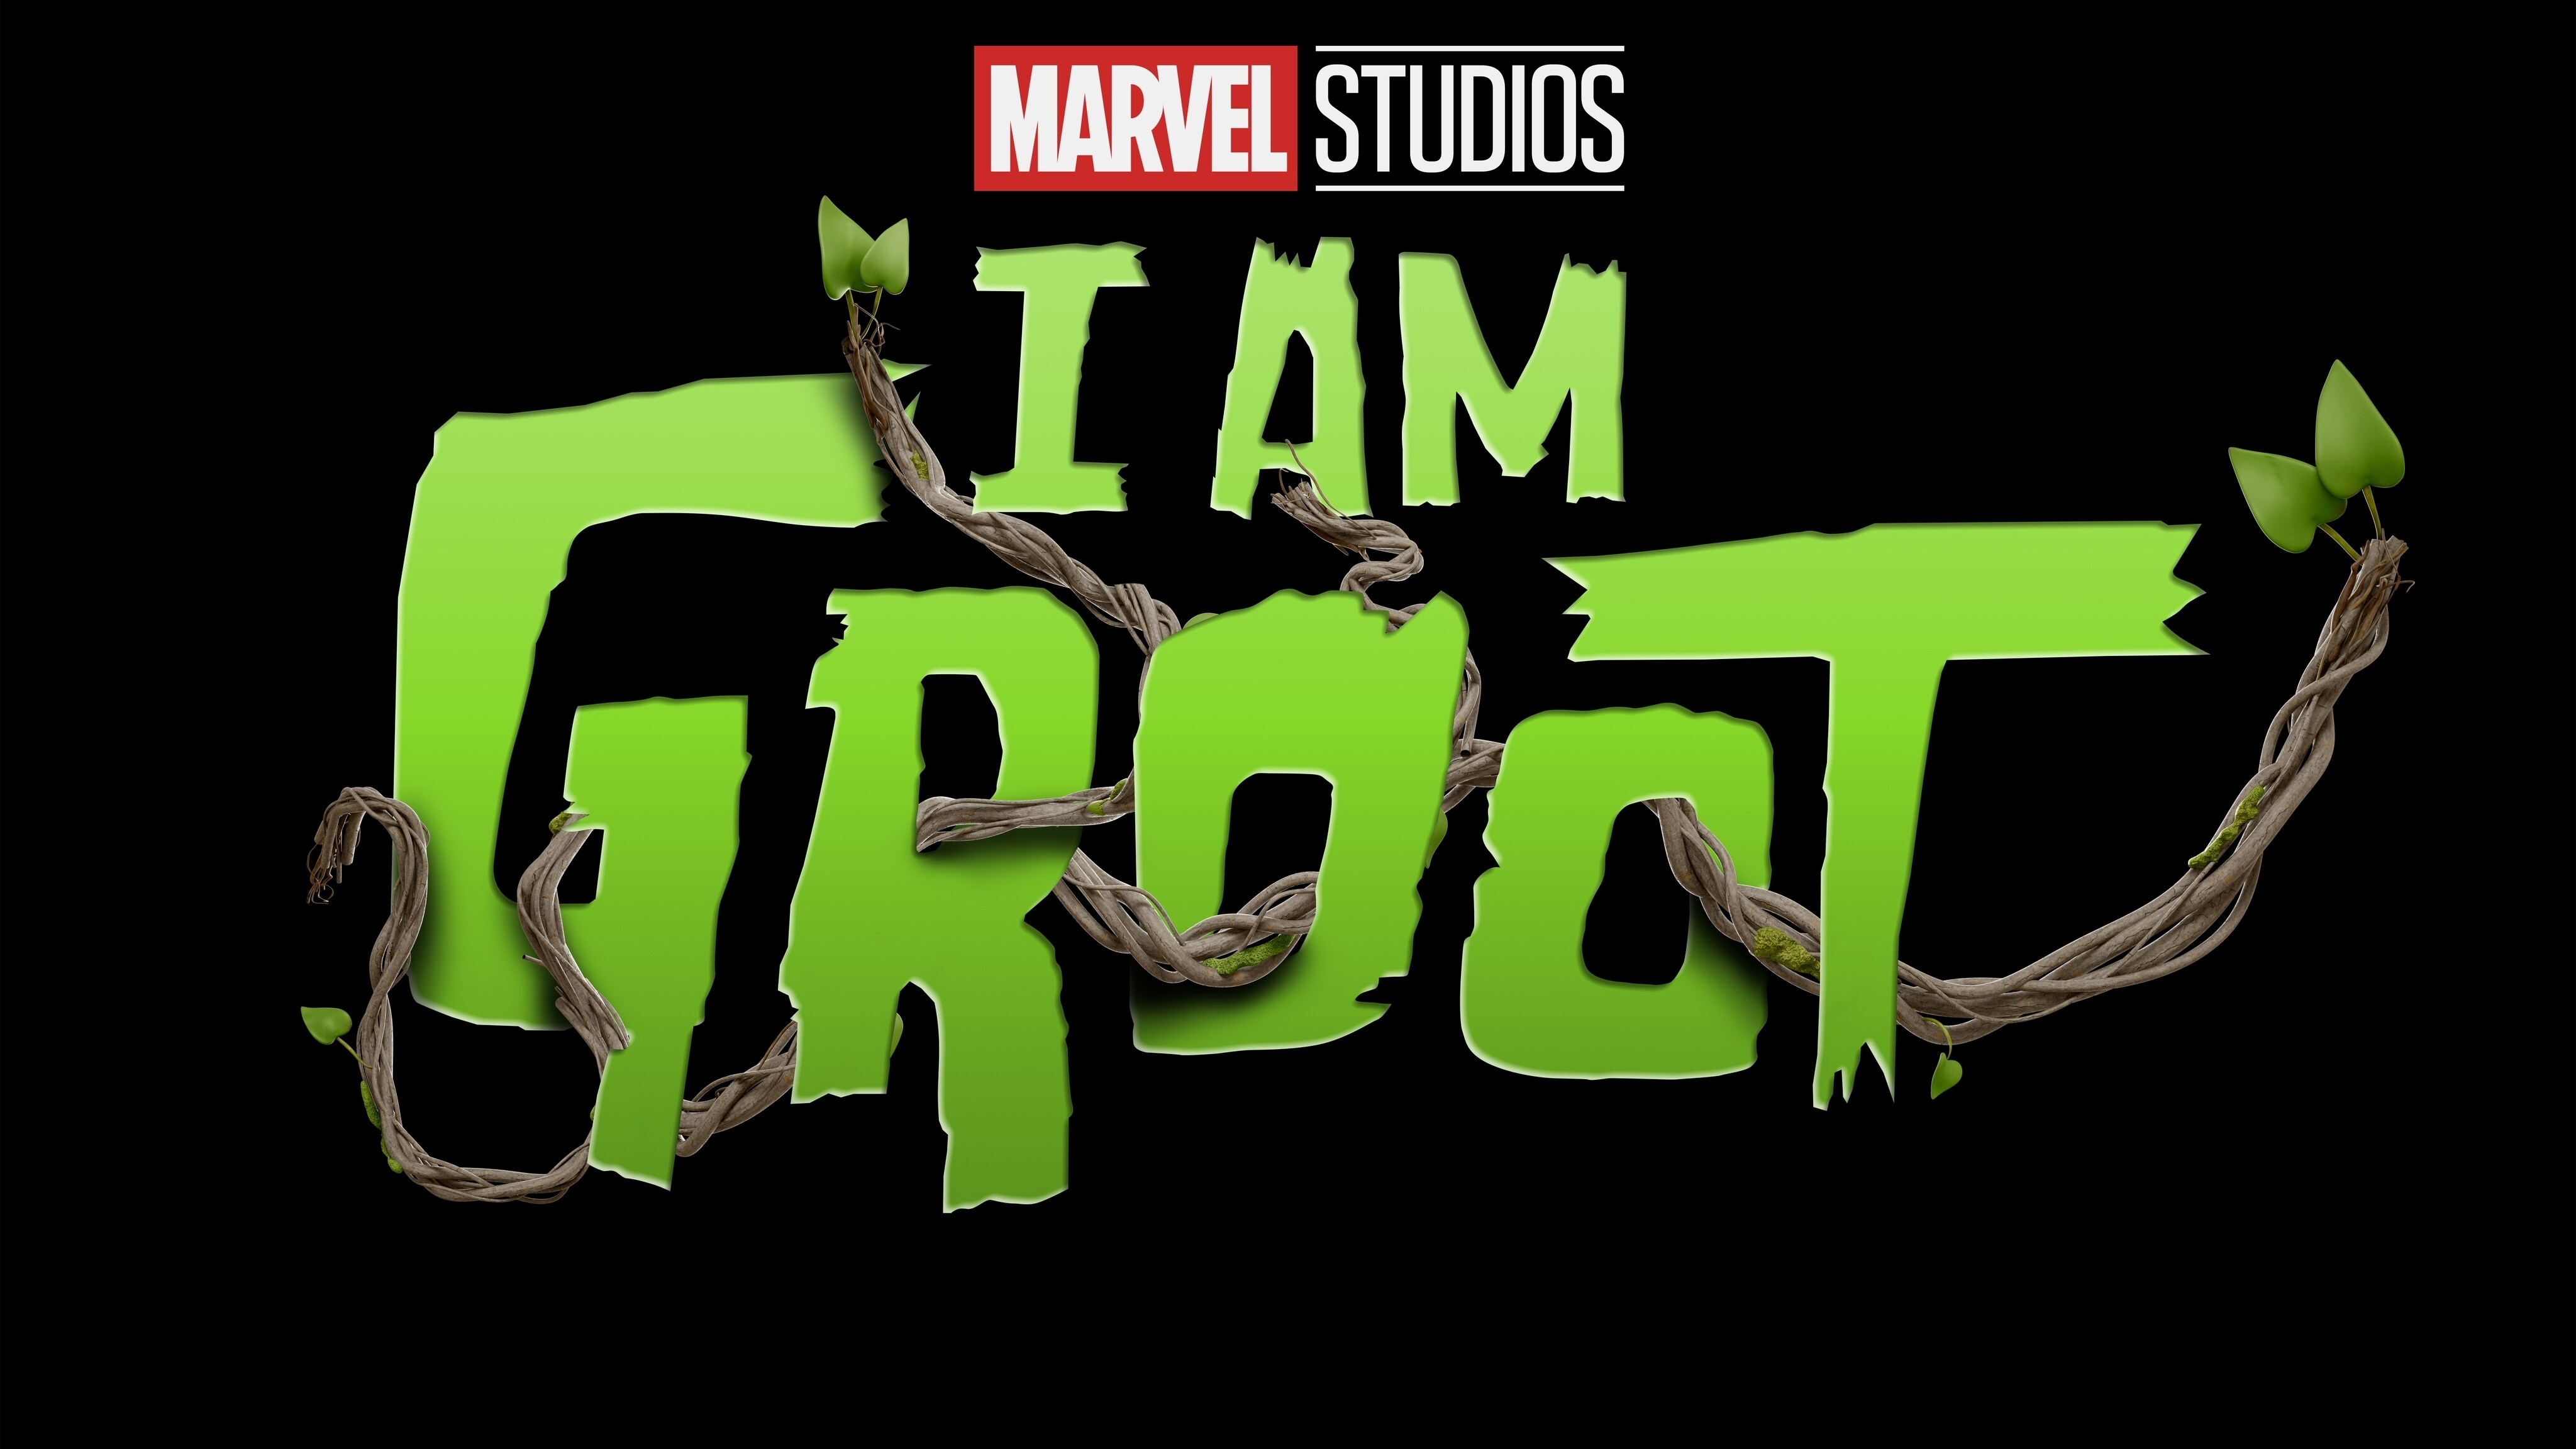 I Am Groot green logo on a black background.